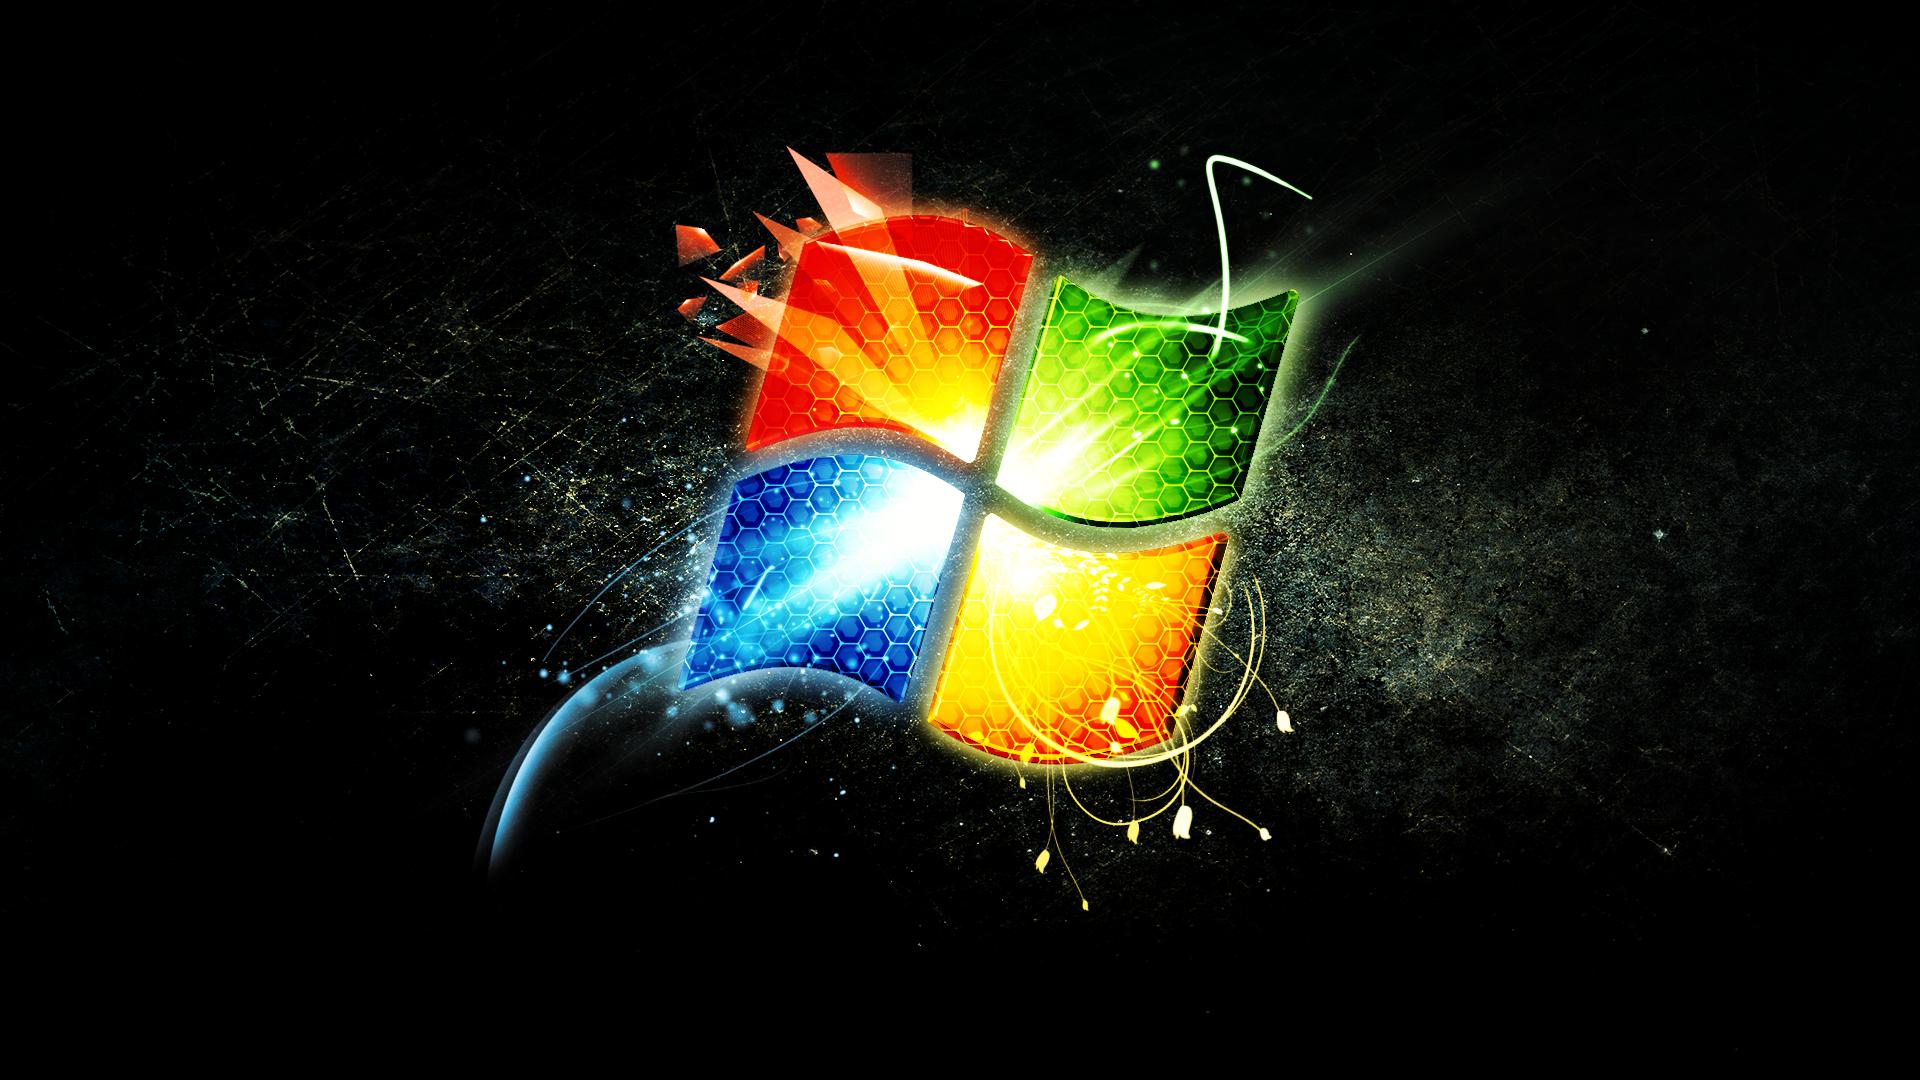 Gif Backgrounds Windows 7 - Wallpaper Cave